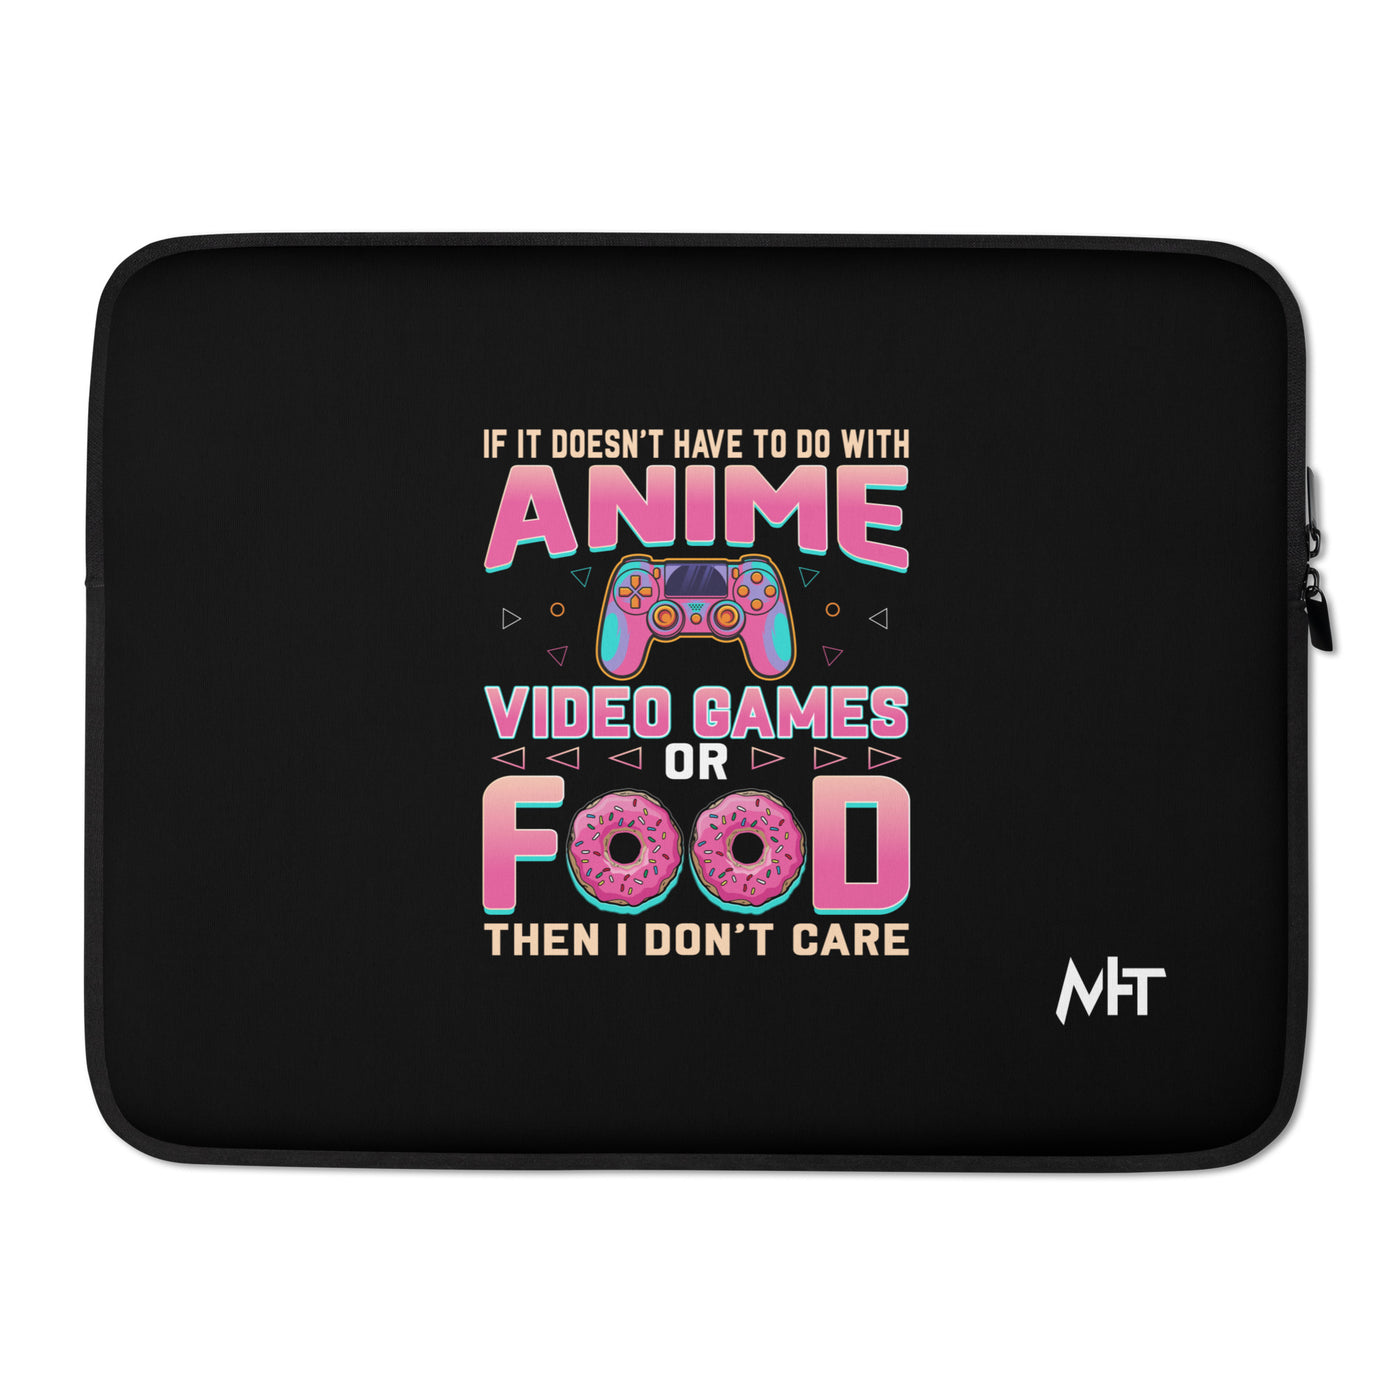 If it doesn't have to do with anime Video game, then I don't care - Laptop Sleeve